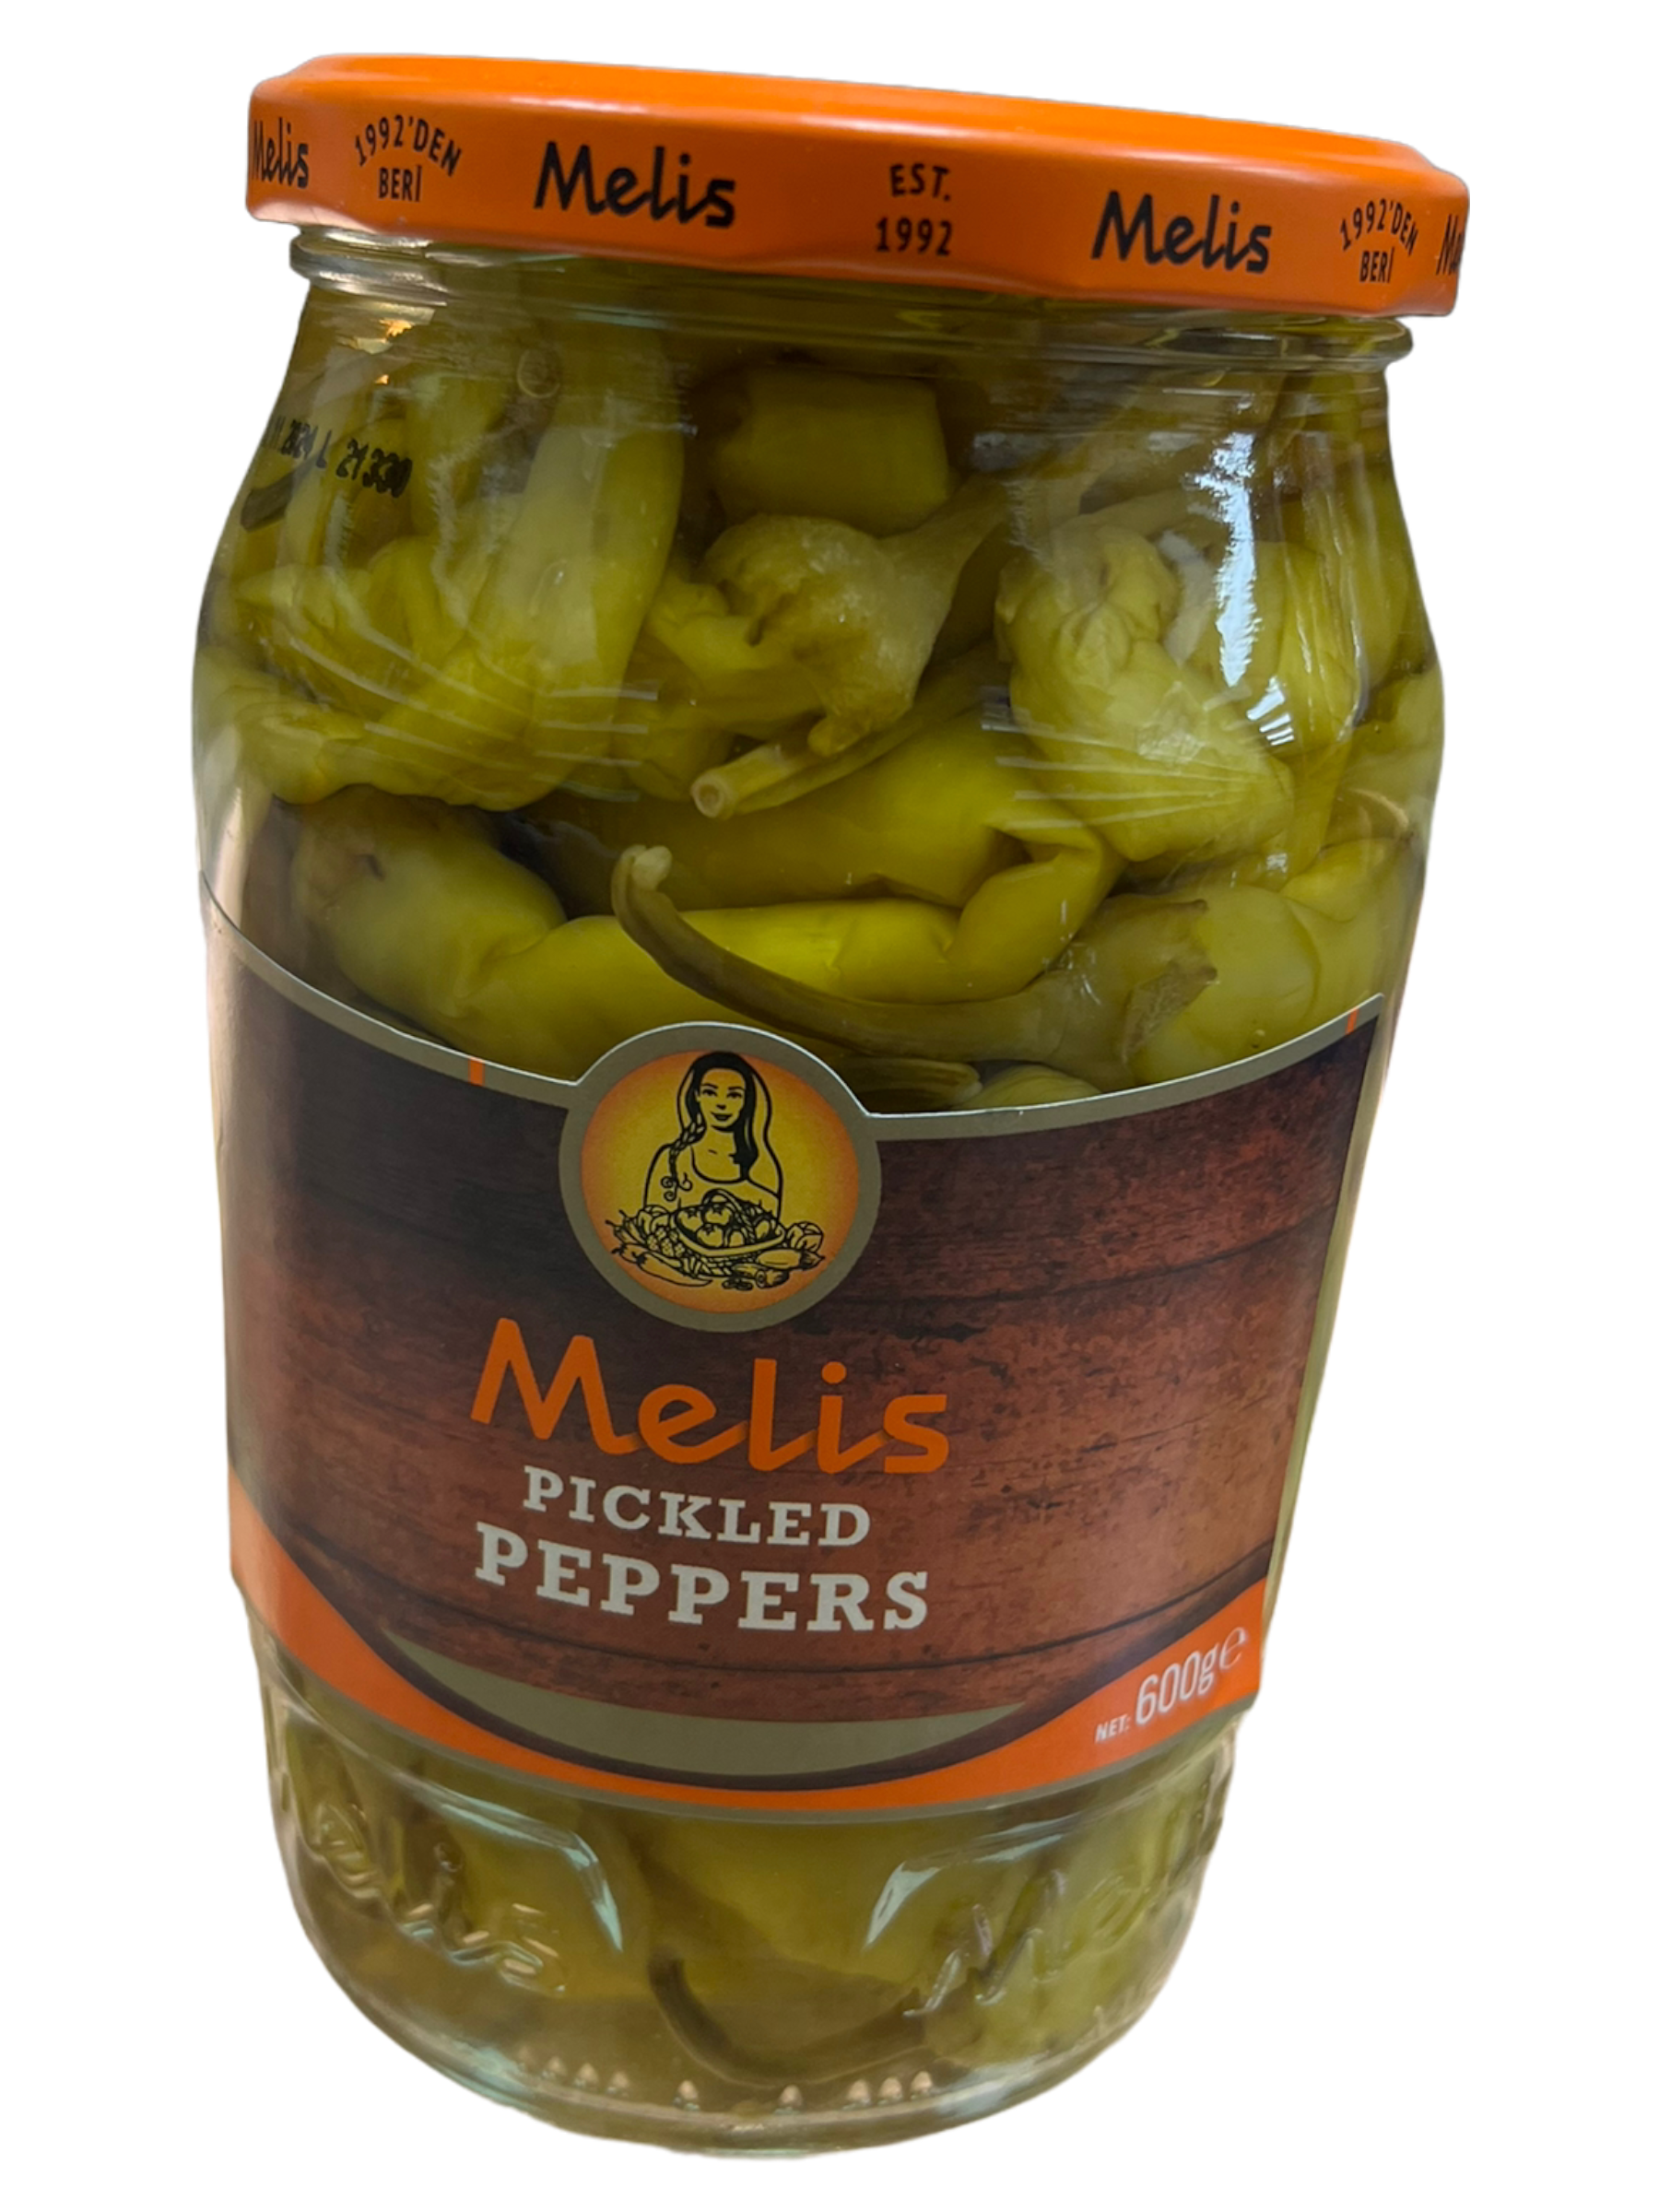 Melis Pickled Peppers